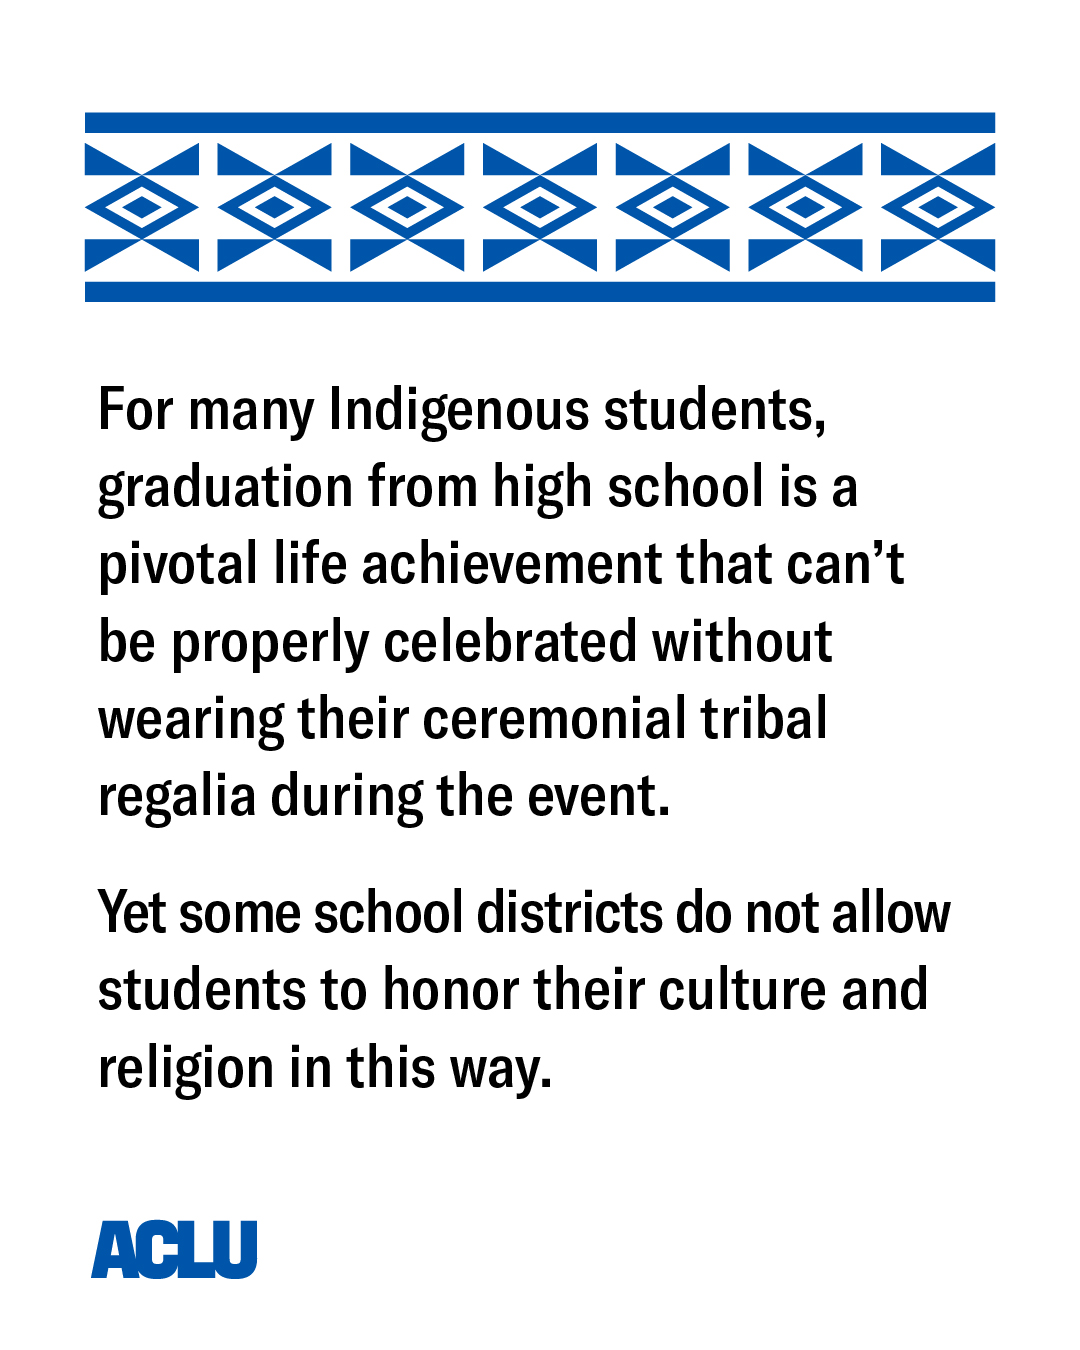 Details that some school districts do not allow students to wear tribal regalia to honor their culture and religion during graduation.